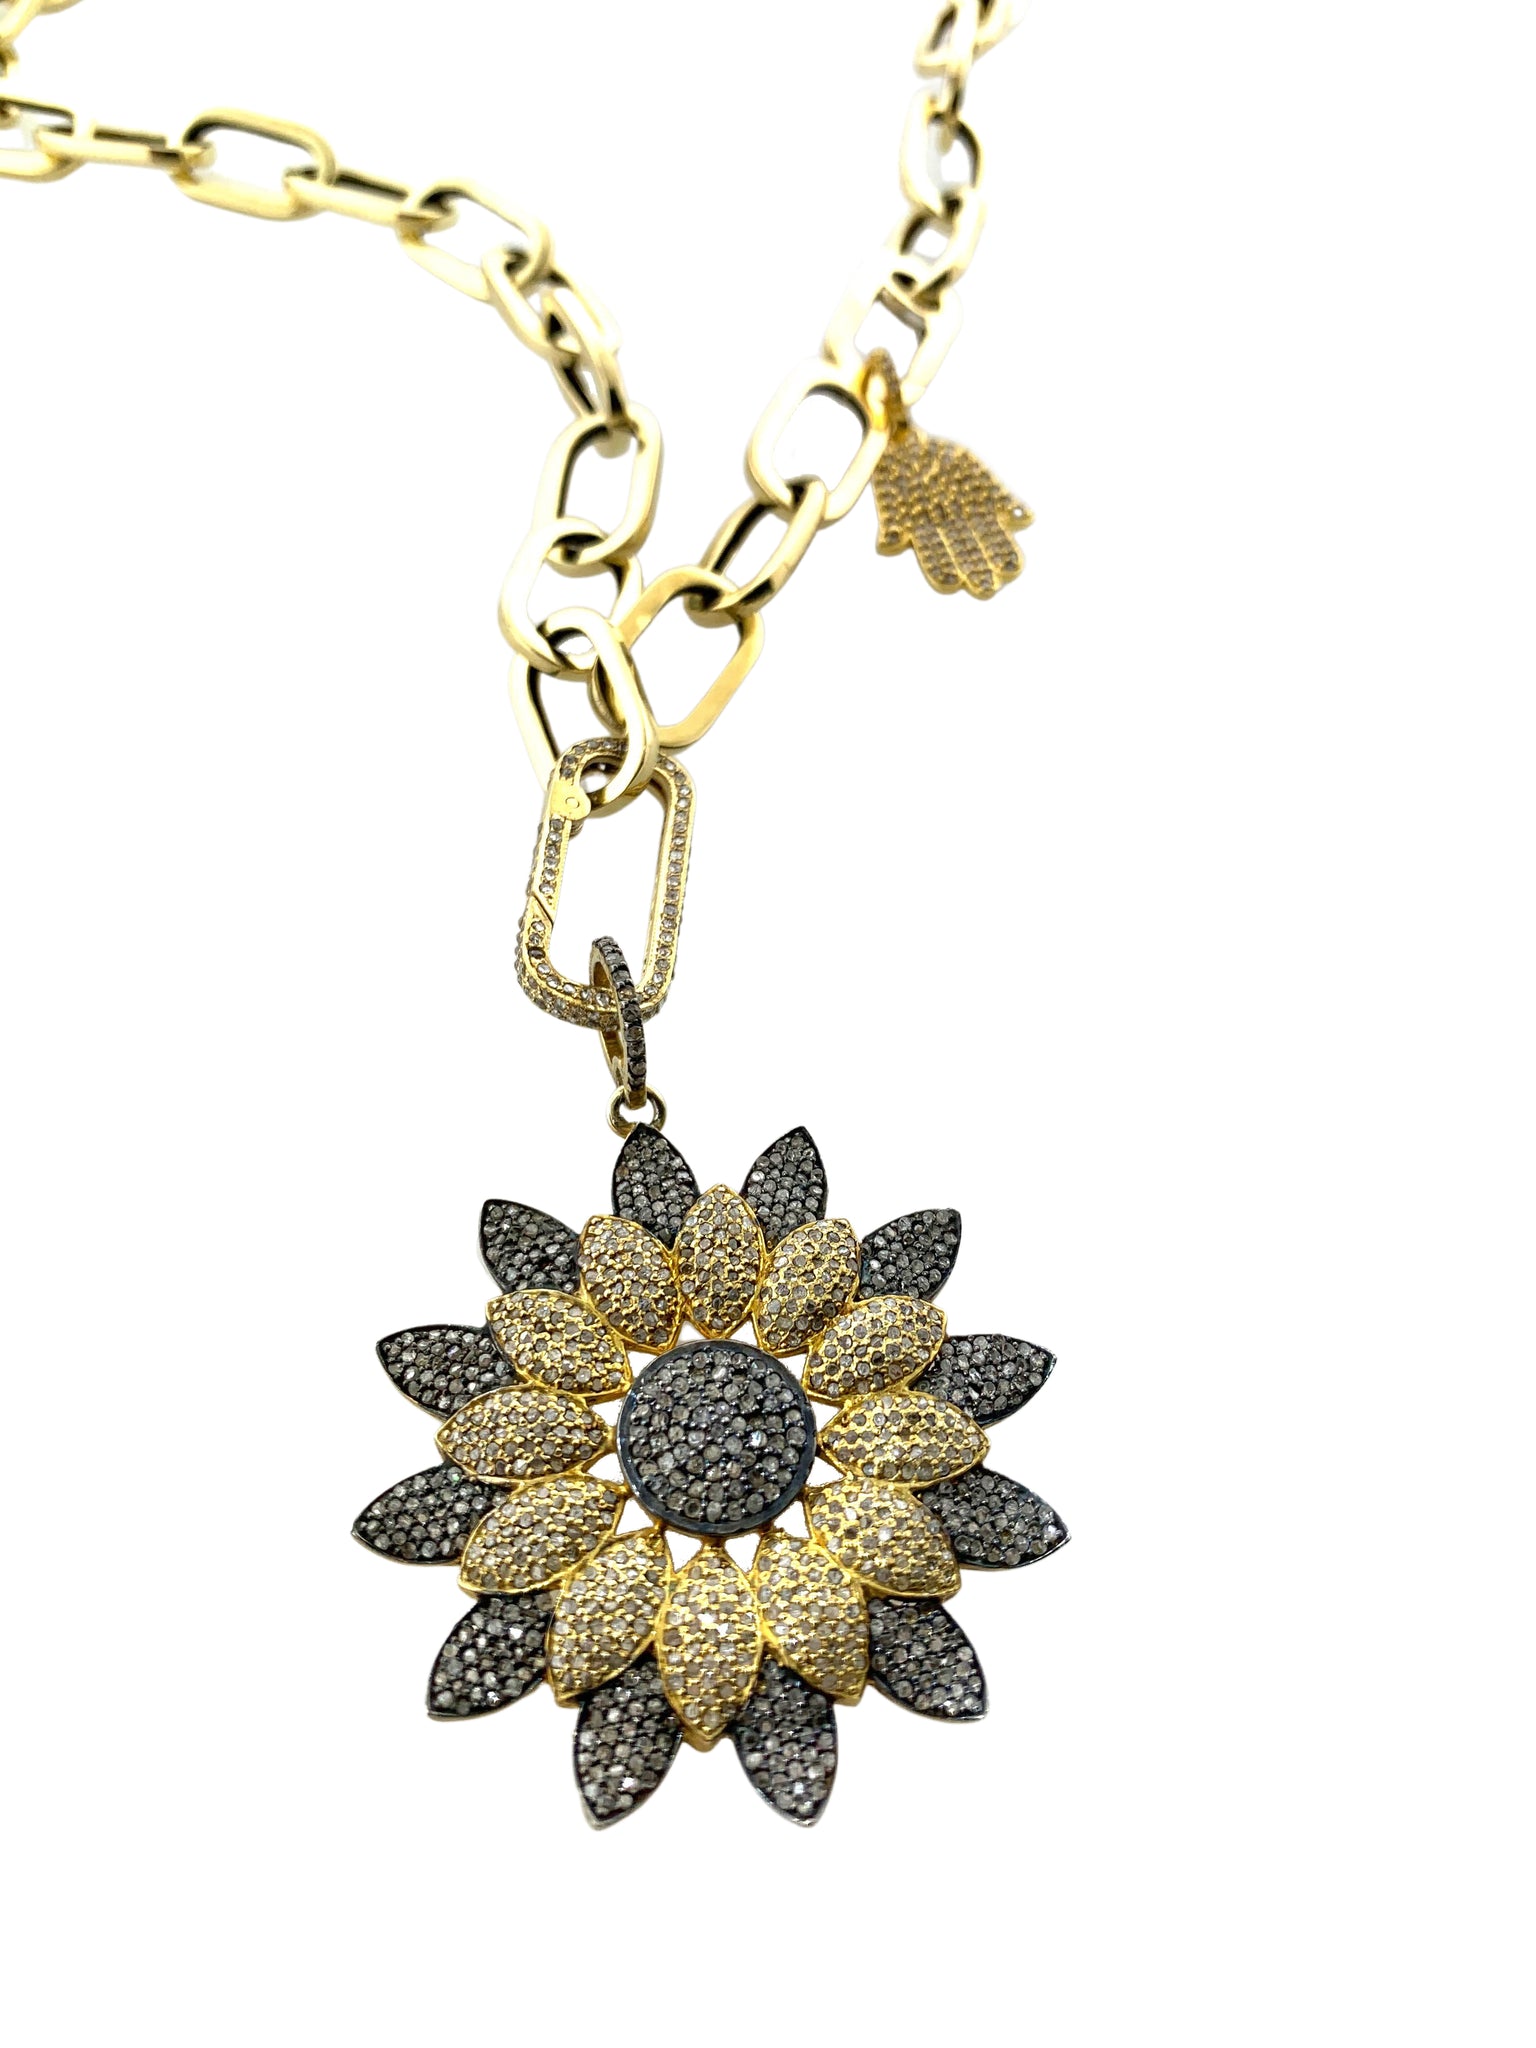 Pave Diamond Flower in Brass and Sterling Silver